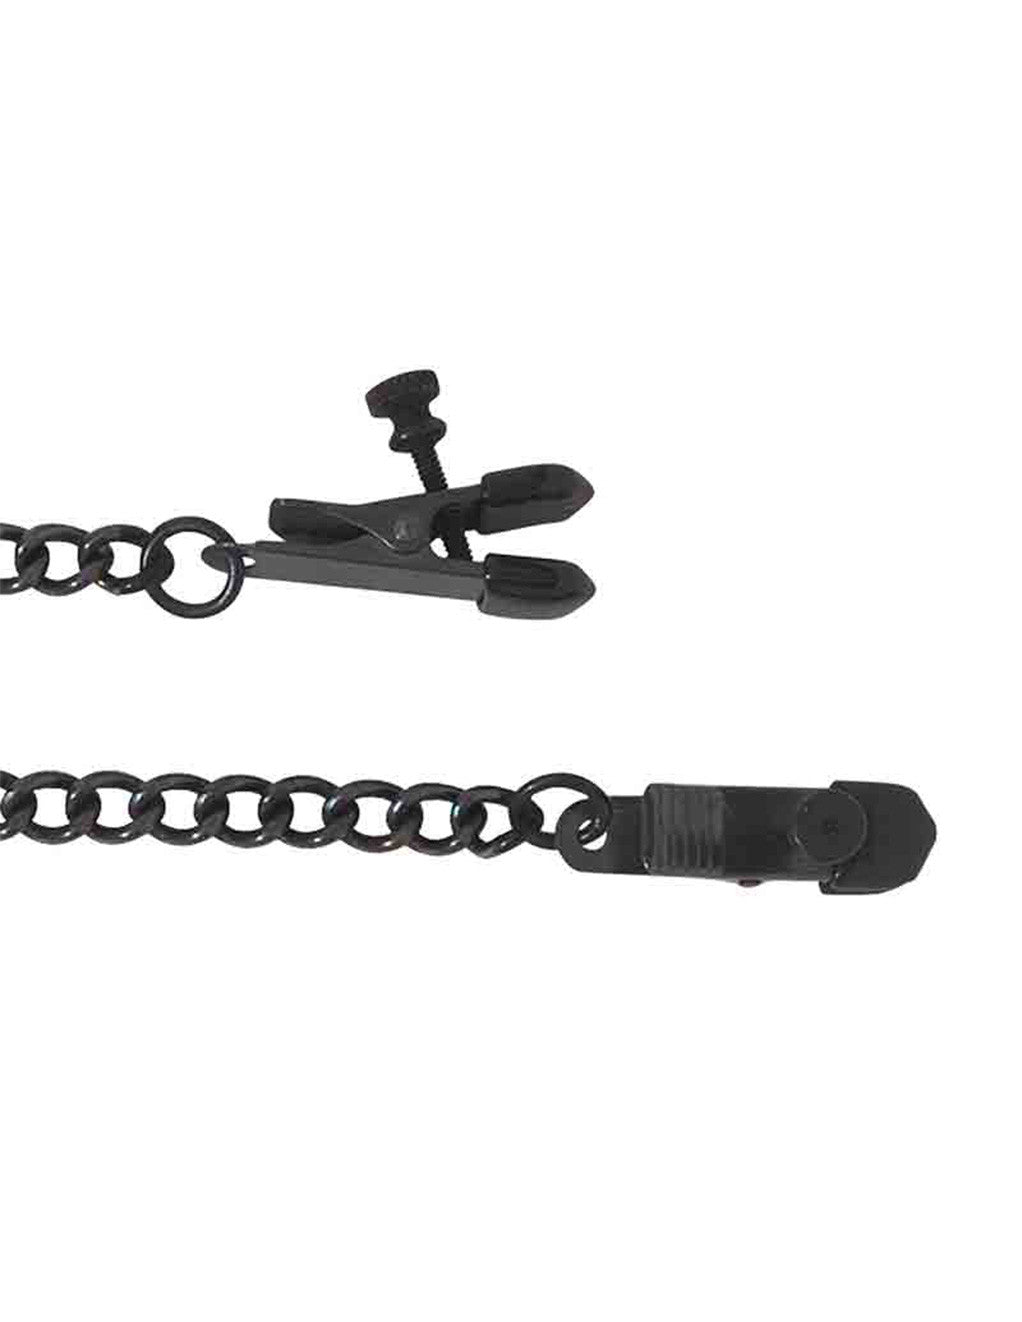 Spartacus Broad Tip Adjustable Chained Nipple Clamps Black closeup